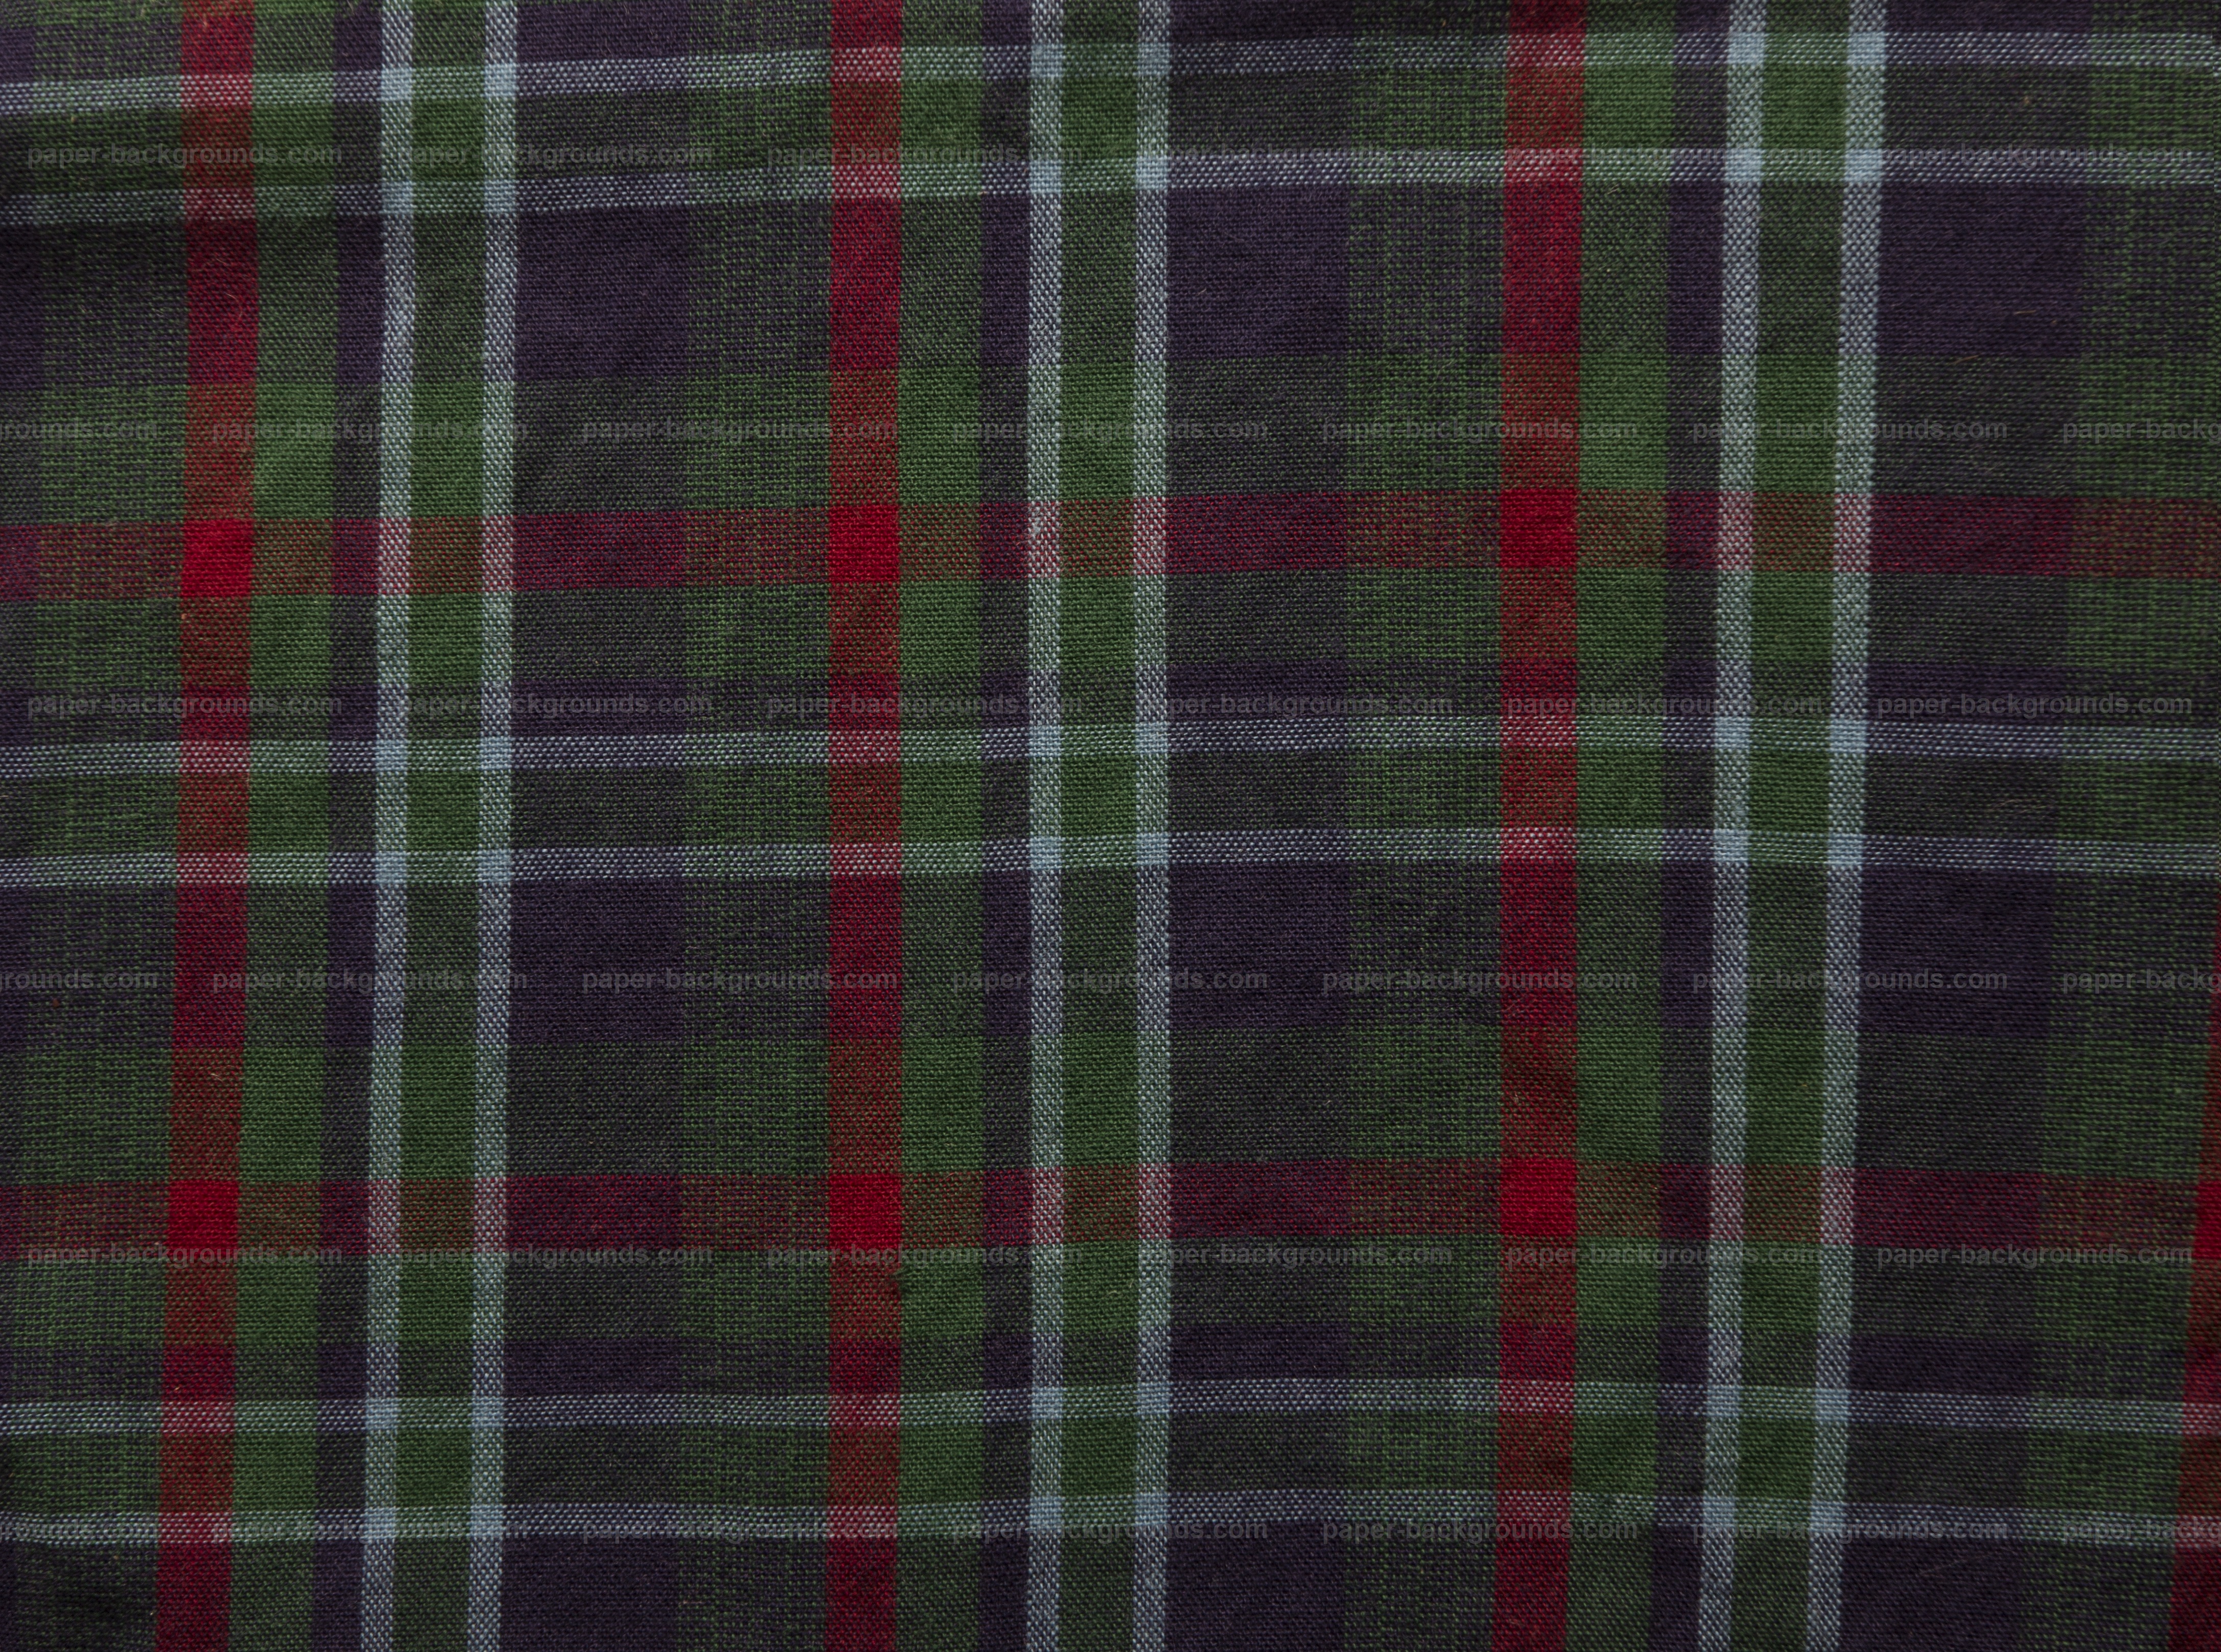 Paper Backgrounds | Dark Plaid Fabric Texture